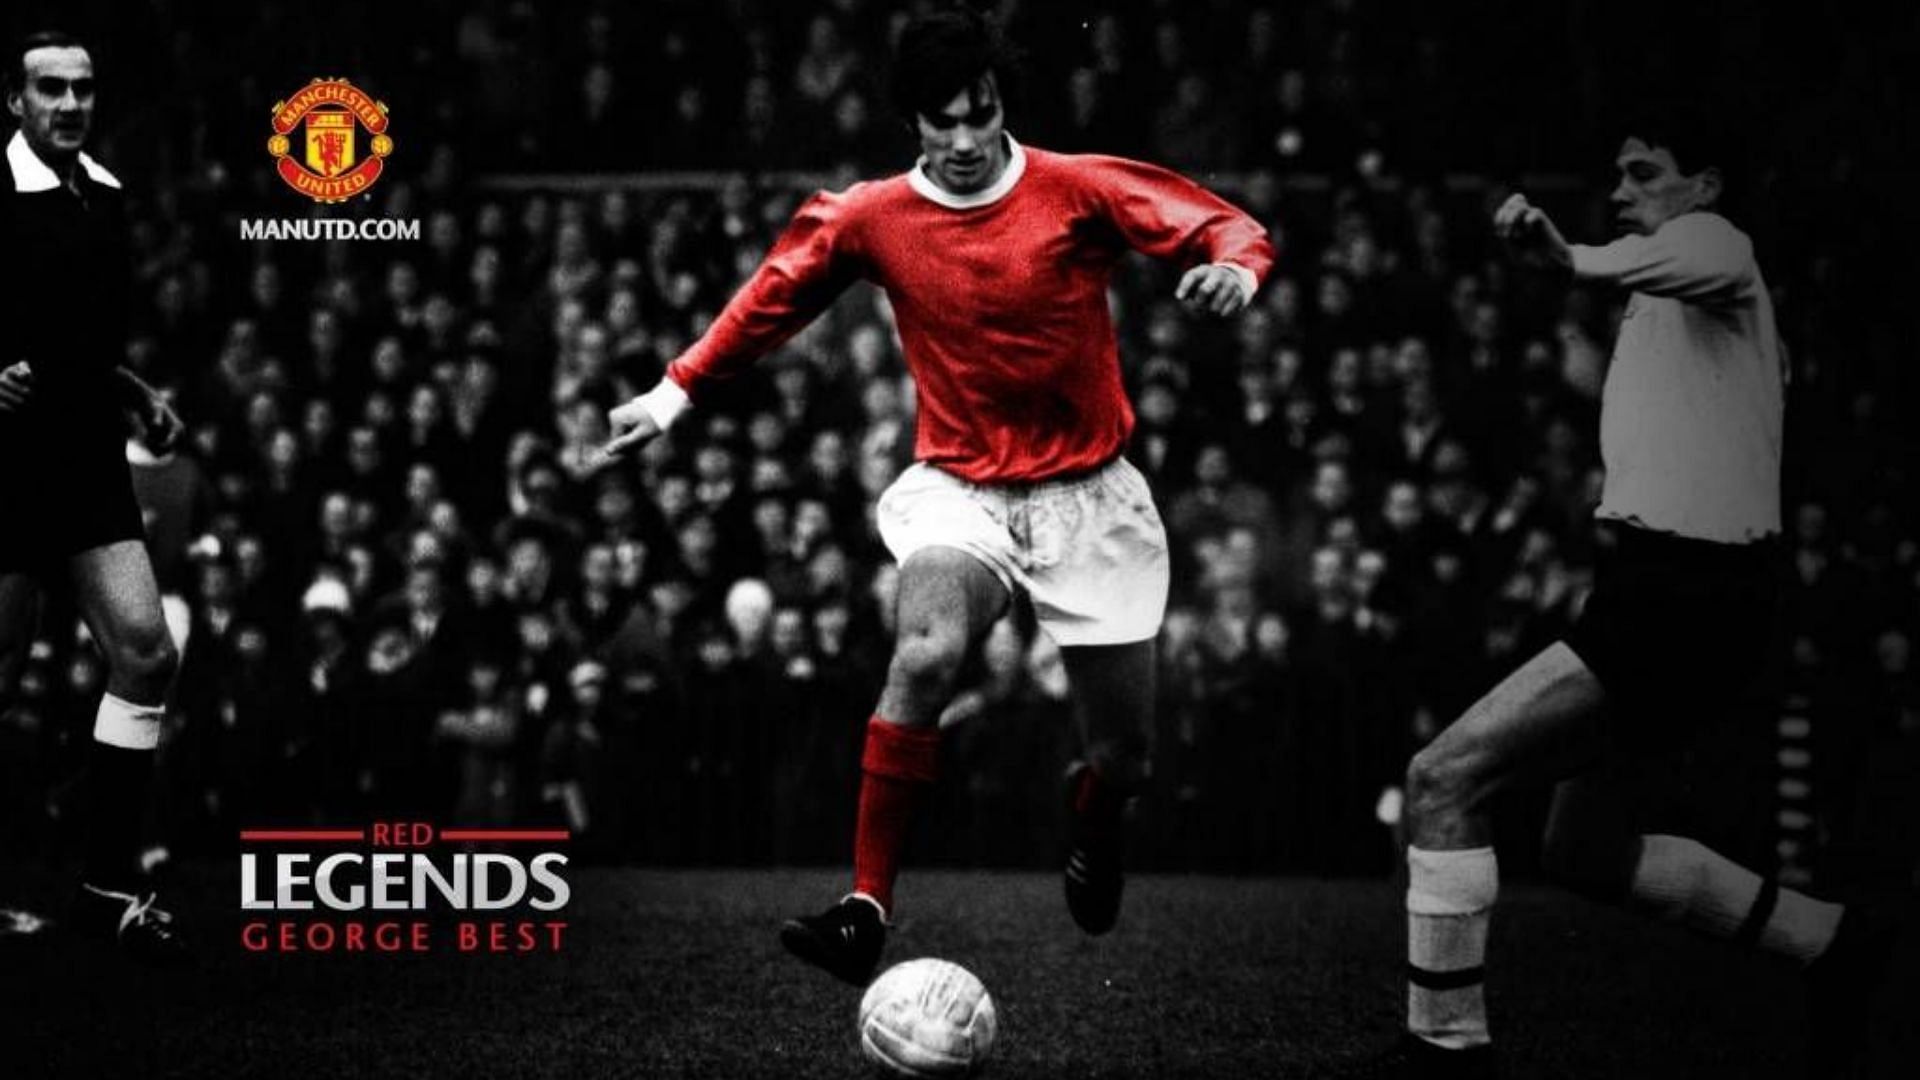 George Best cast a spell with the ball at his feet